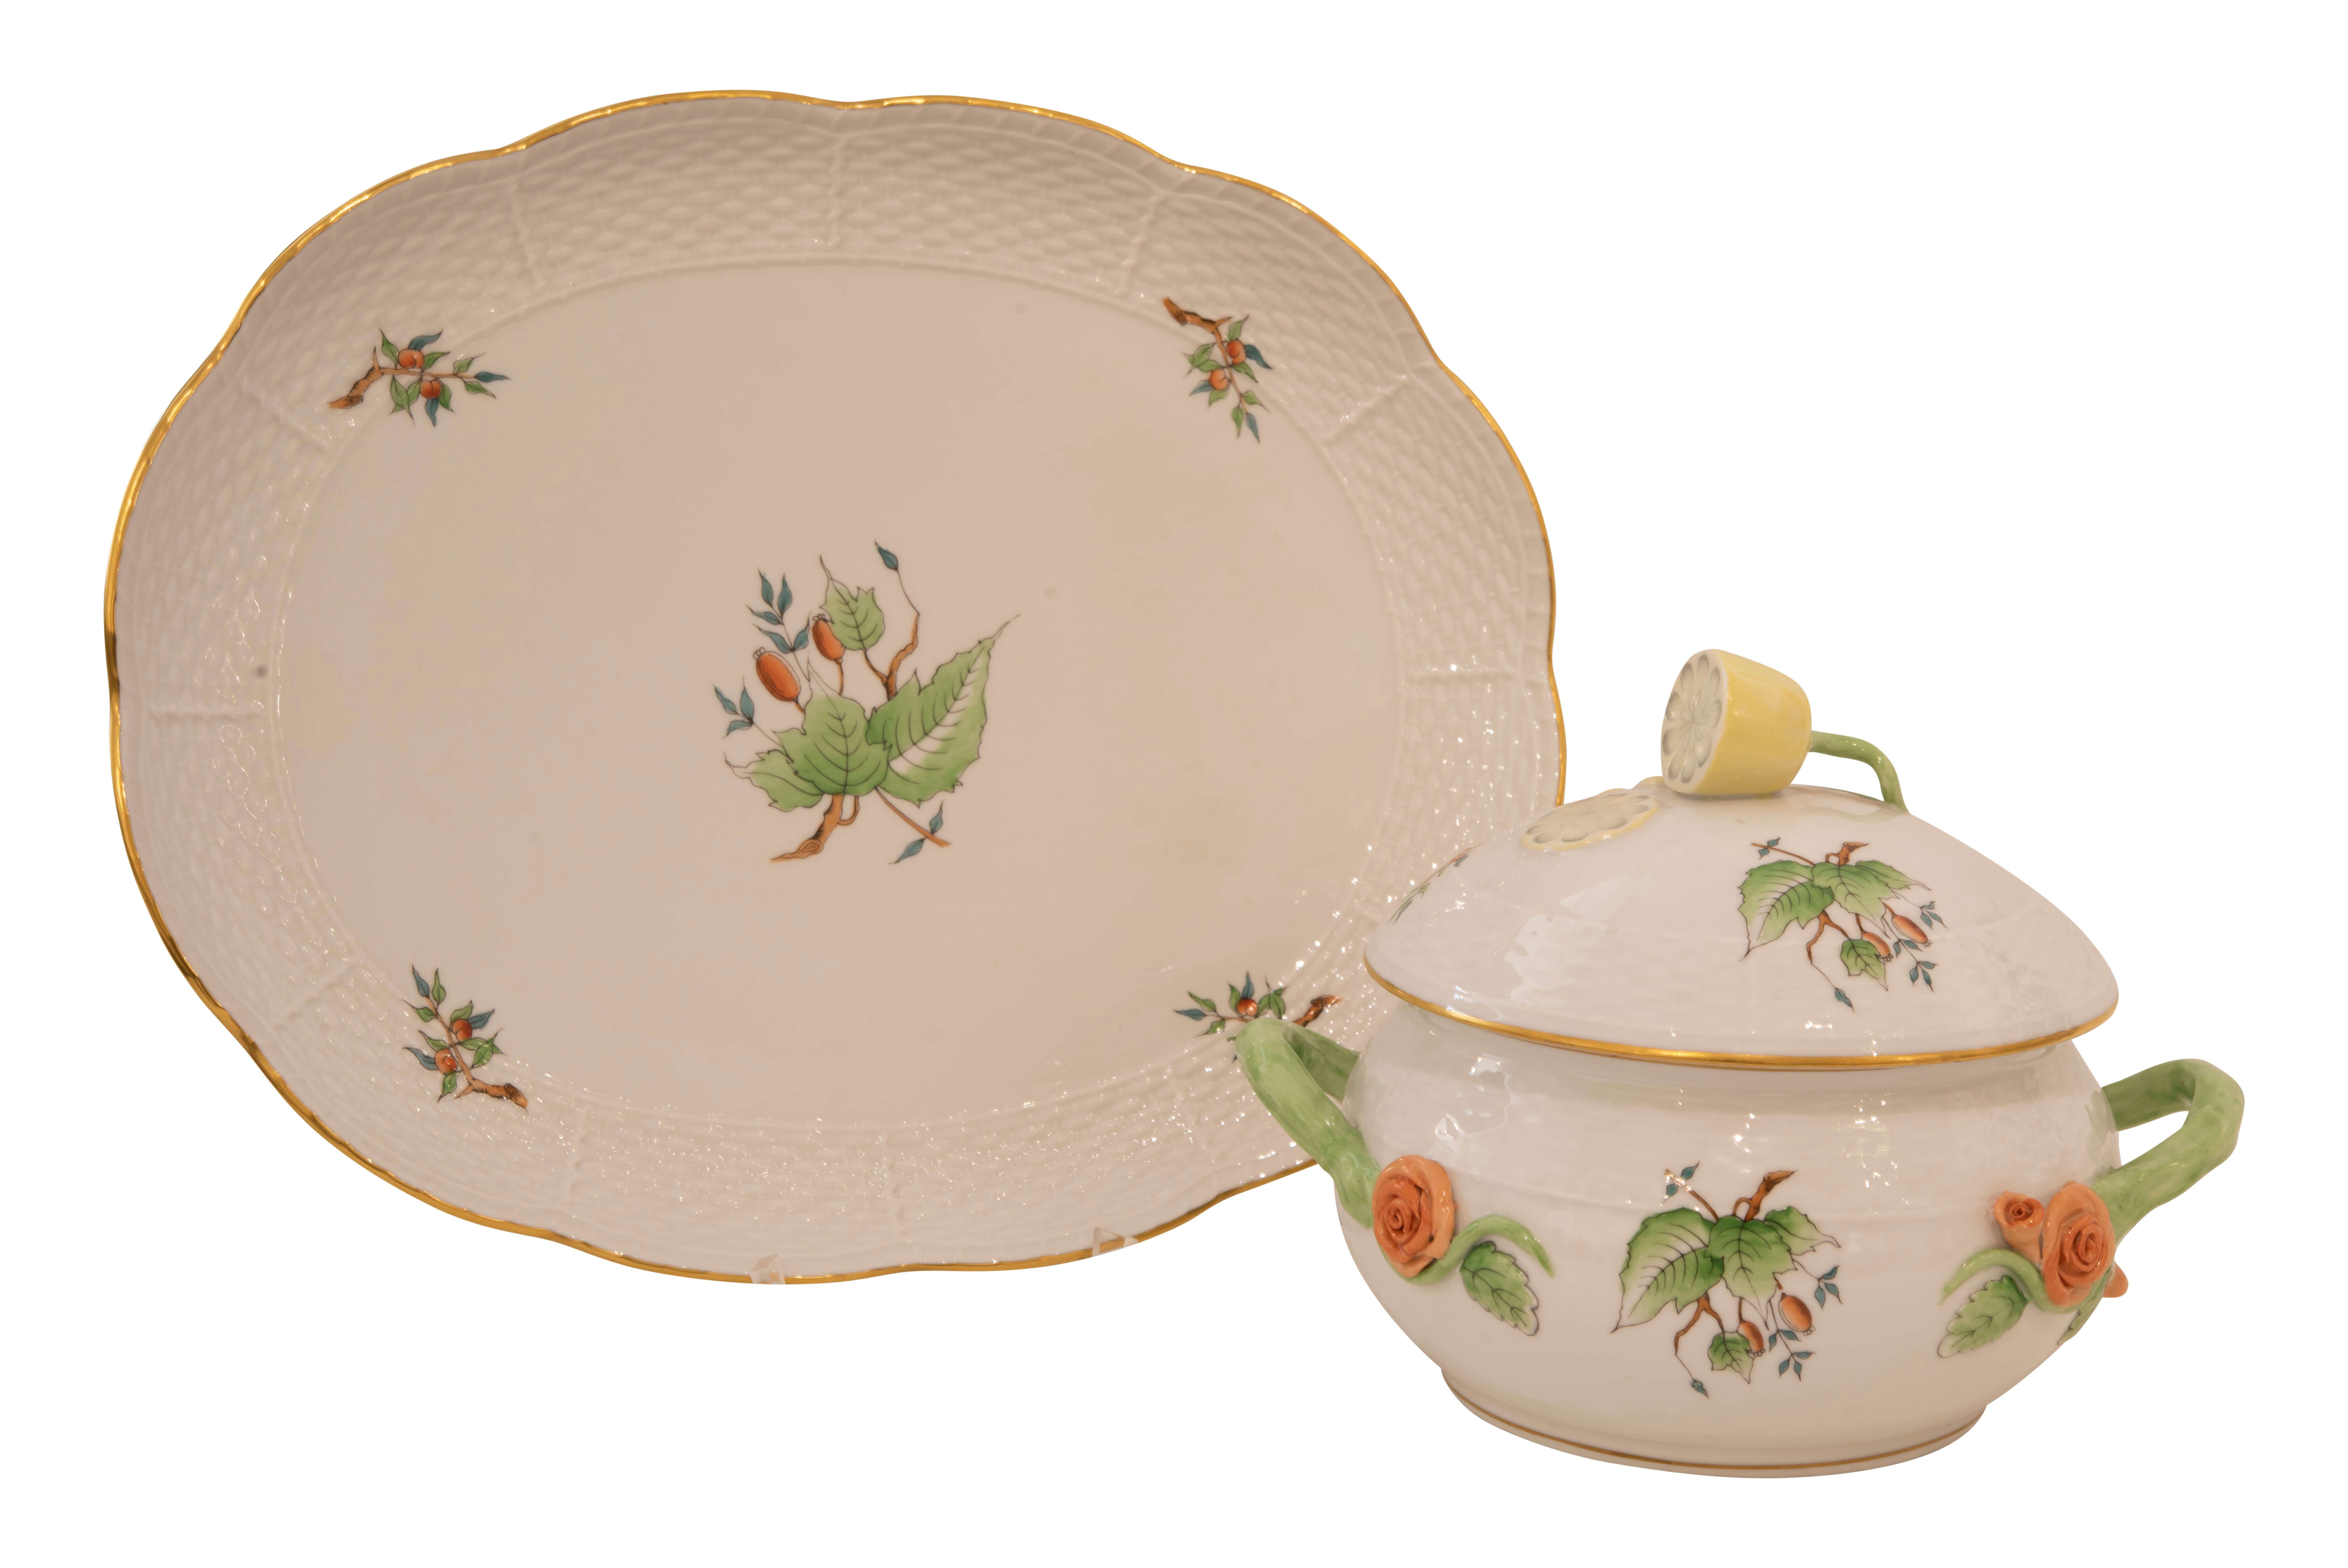 Herend Ungarn Suppenterrine mit ovaler Servierplatte|Herend Hungary Soup Tureen with Oval Serving Pl - Image 5 of 5